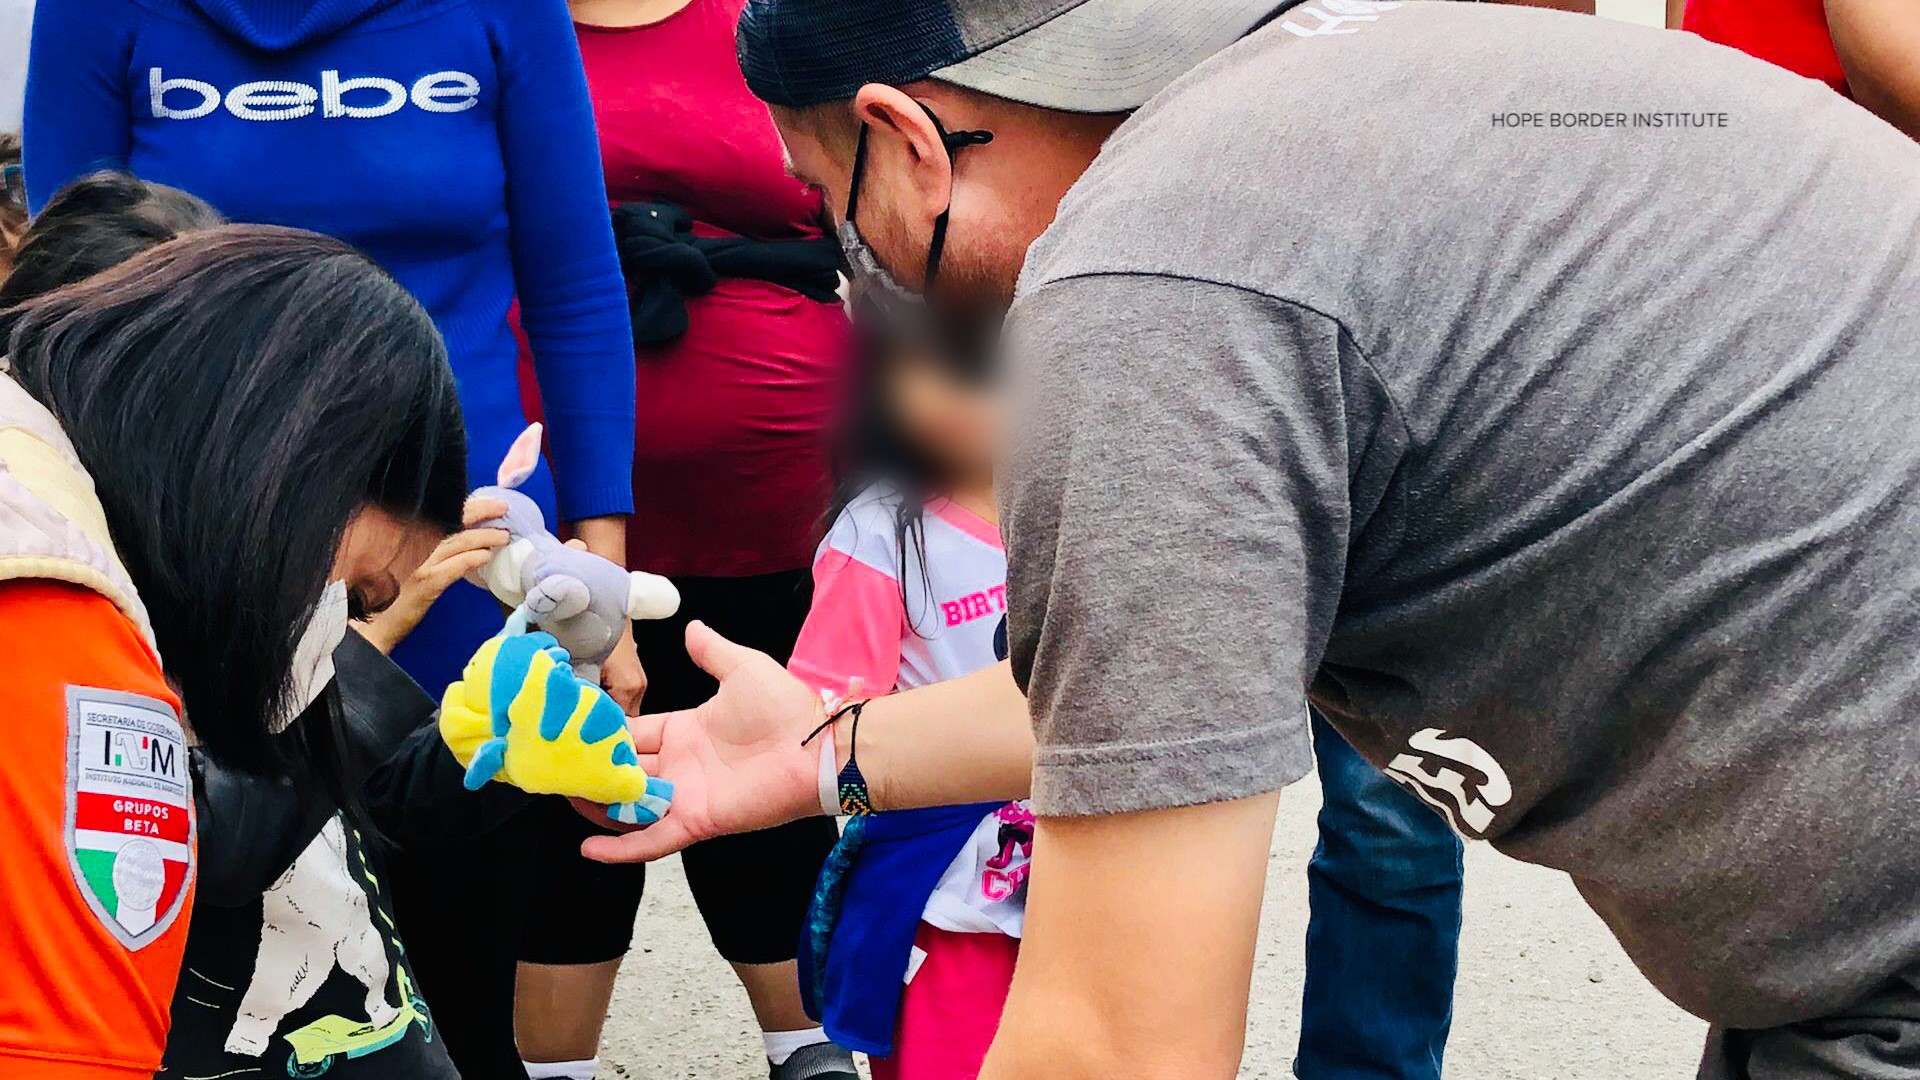 Human Rights organization Hope Border Institute reported asylum seekers were turned away by CBP at the El Paso port of entry.